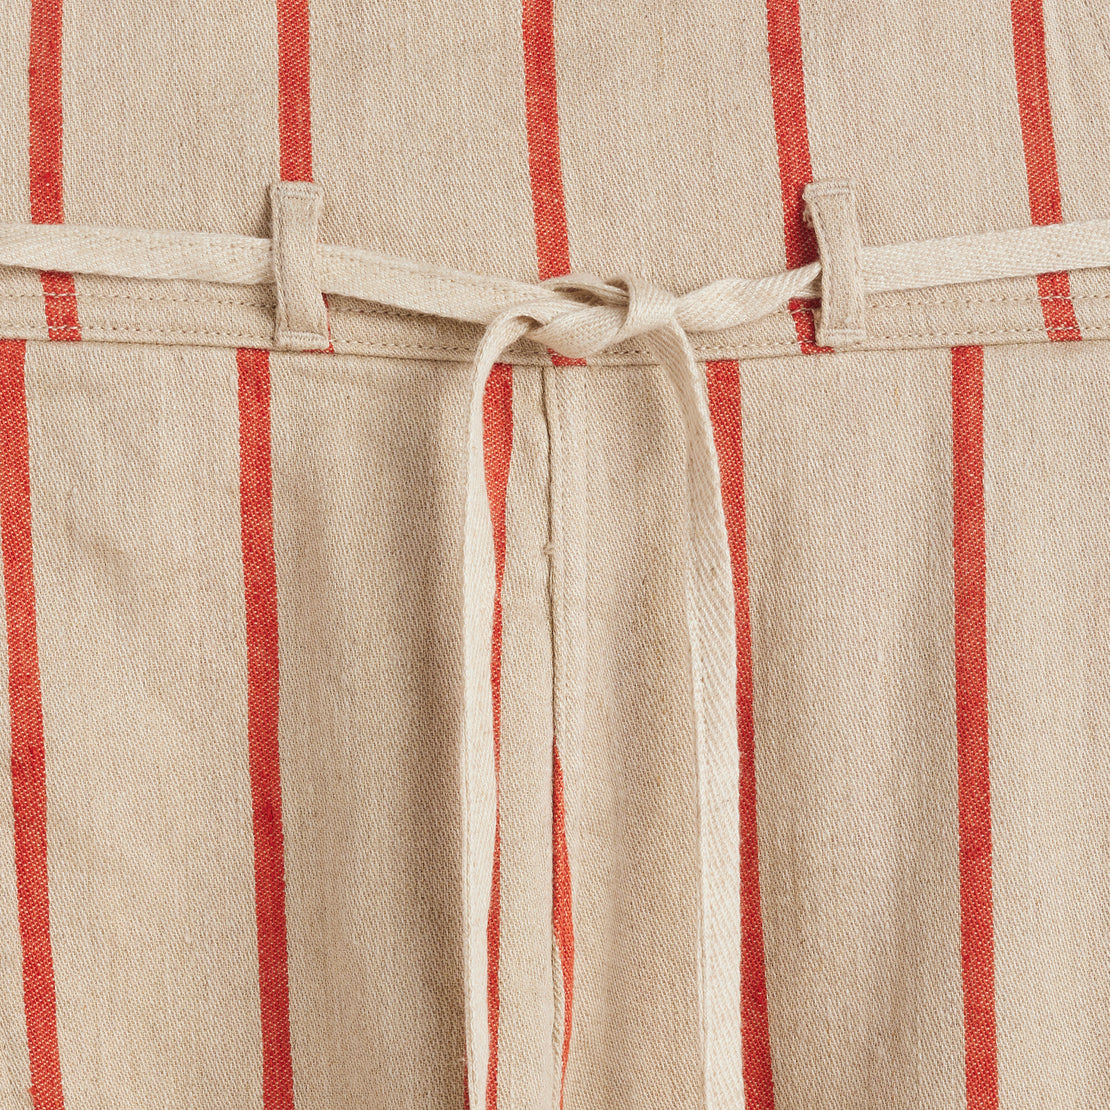 Linen Phillies Stripe Welder Overall - Ecru/Red - Kapital - STAG Provisions - W - Onepiece - Overalls